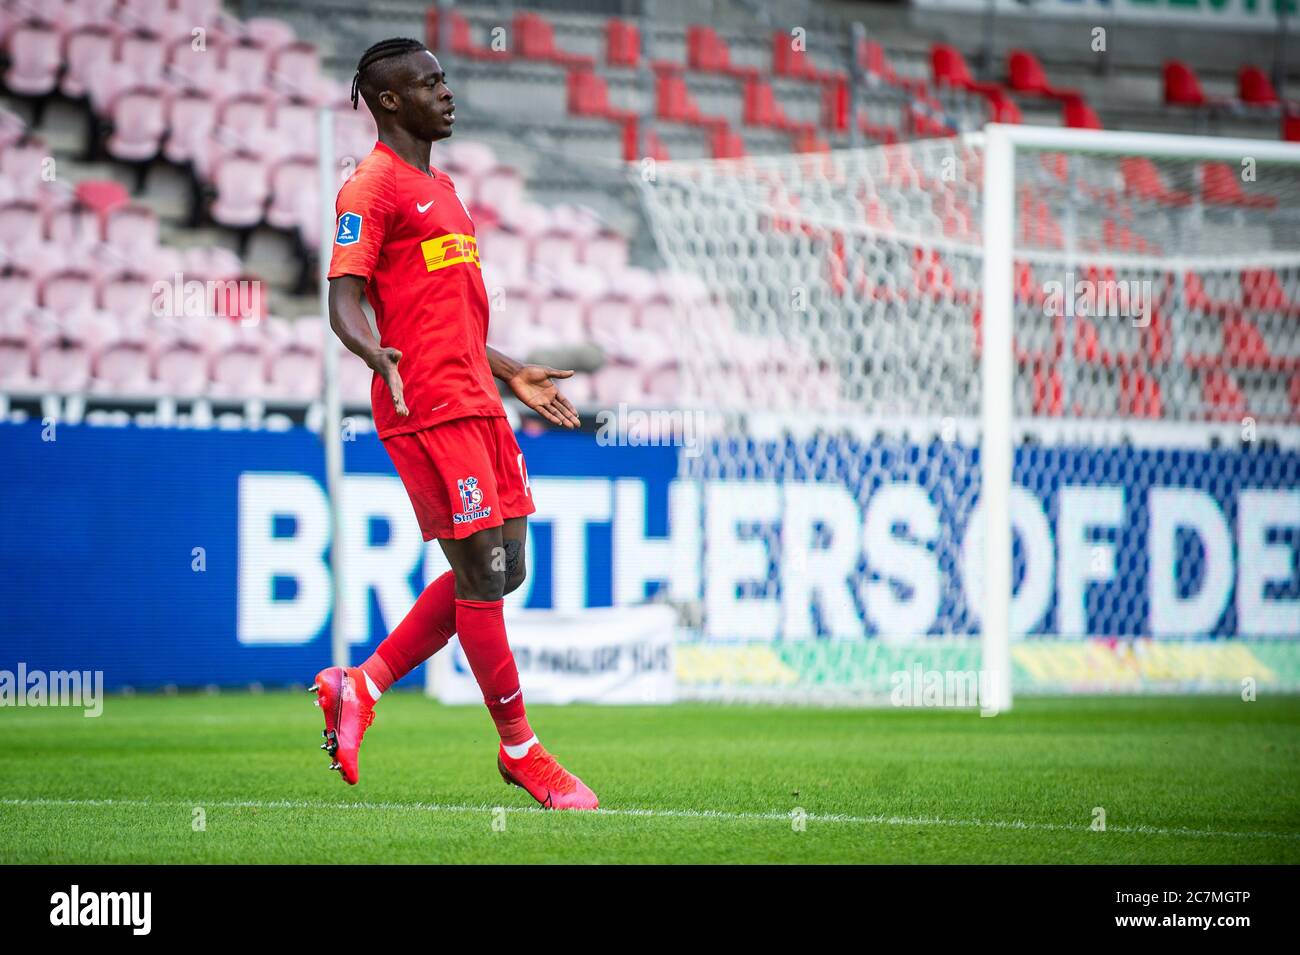 Herning Denmark 09th July 2020 Kamal Deen Sulemana 14 Of Fc Nordsjaelland Scores His Second Goal During The 3f Superliga Match Between Fc Midtjylland And Fc Nordsjaelland At Mch Arena In Herning Photo